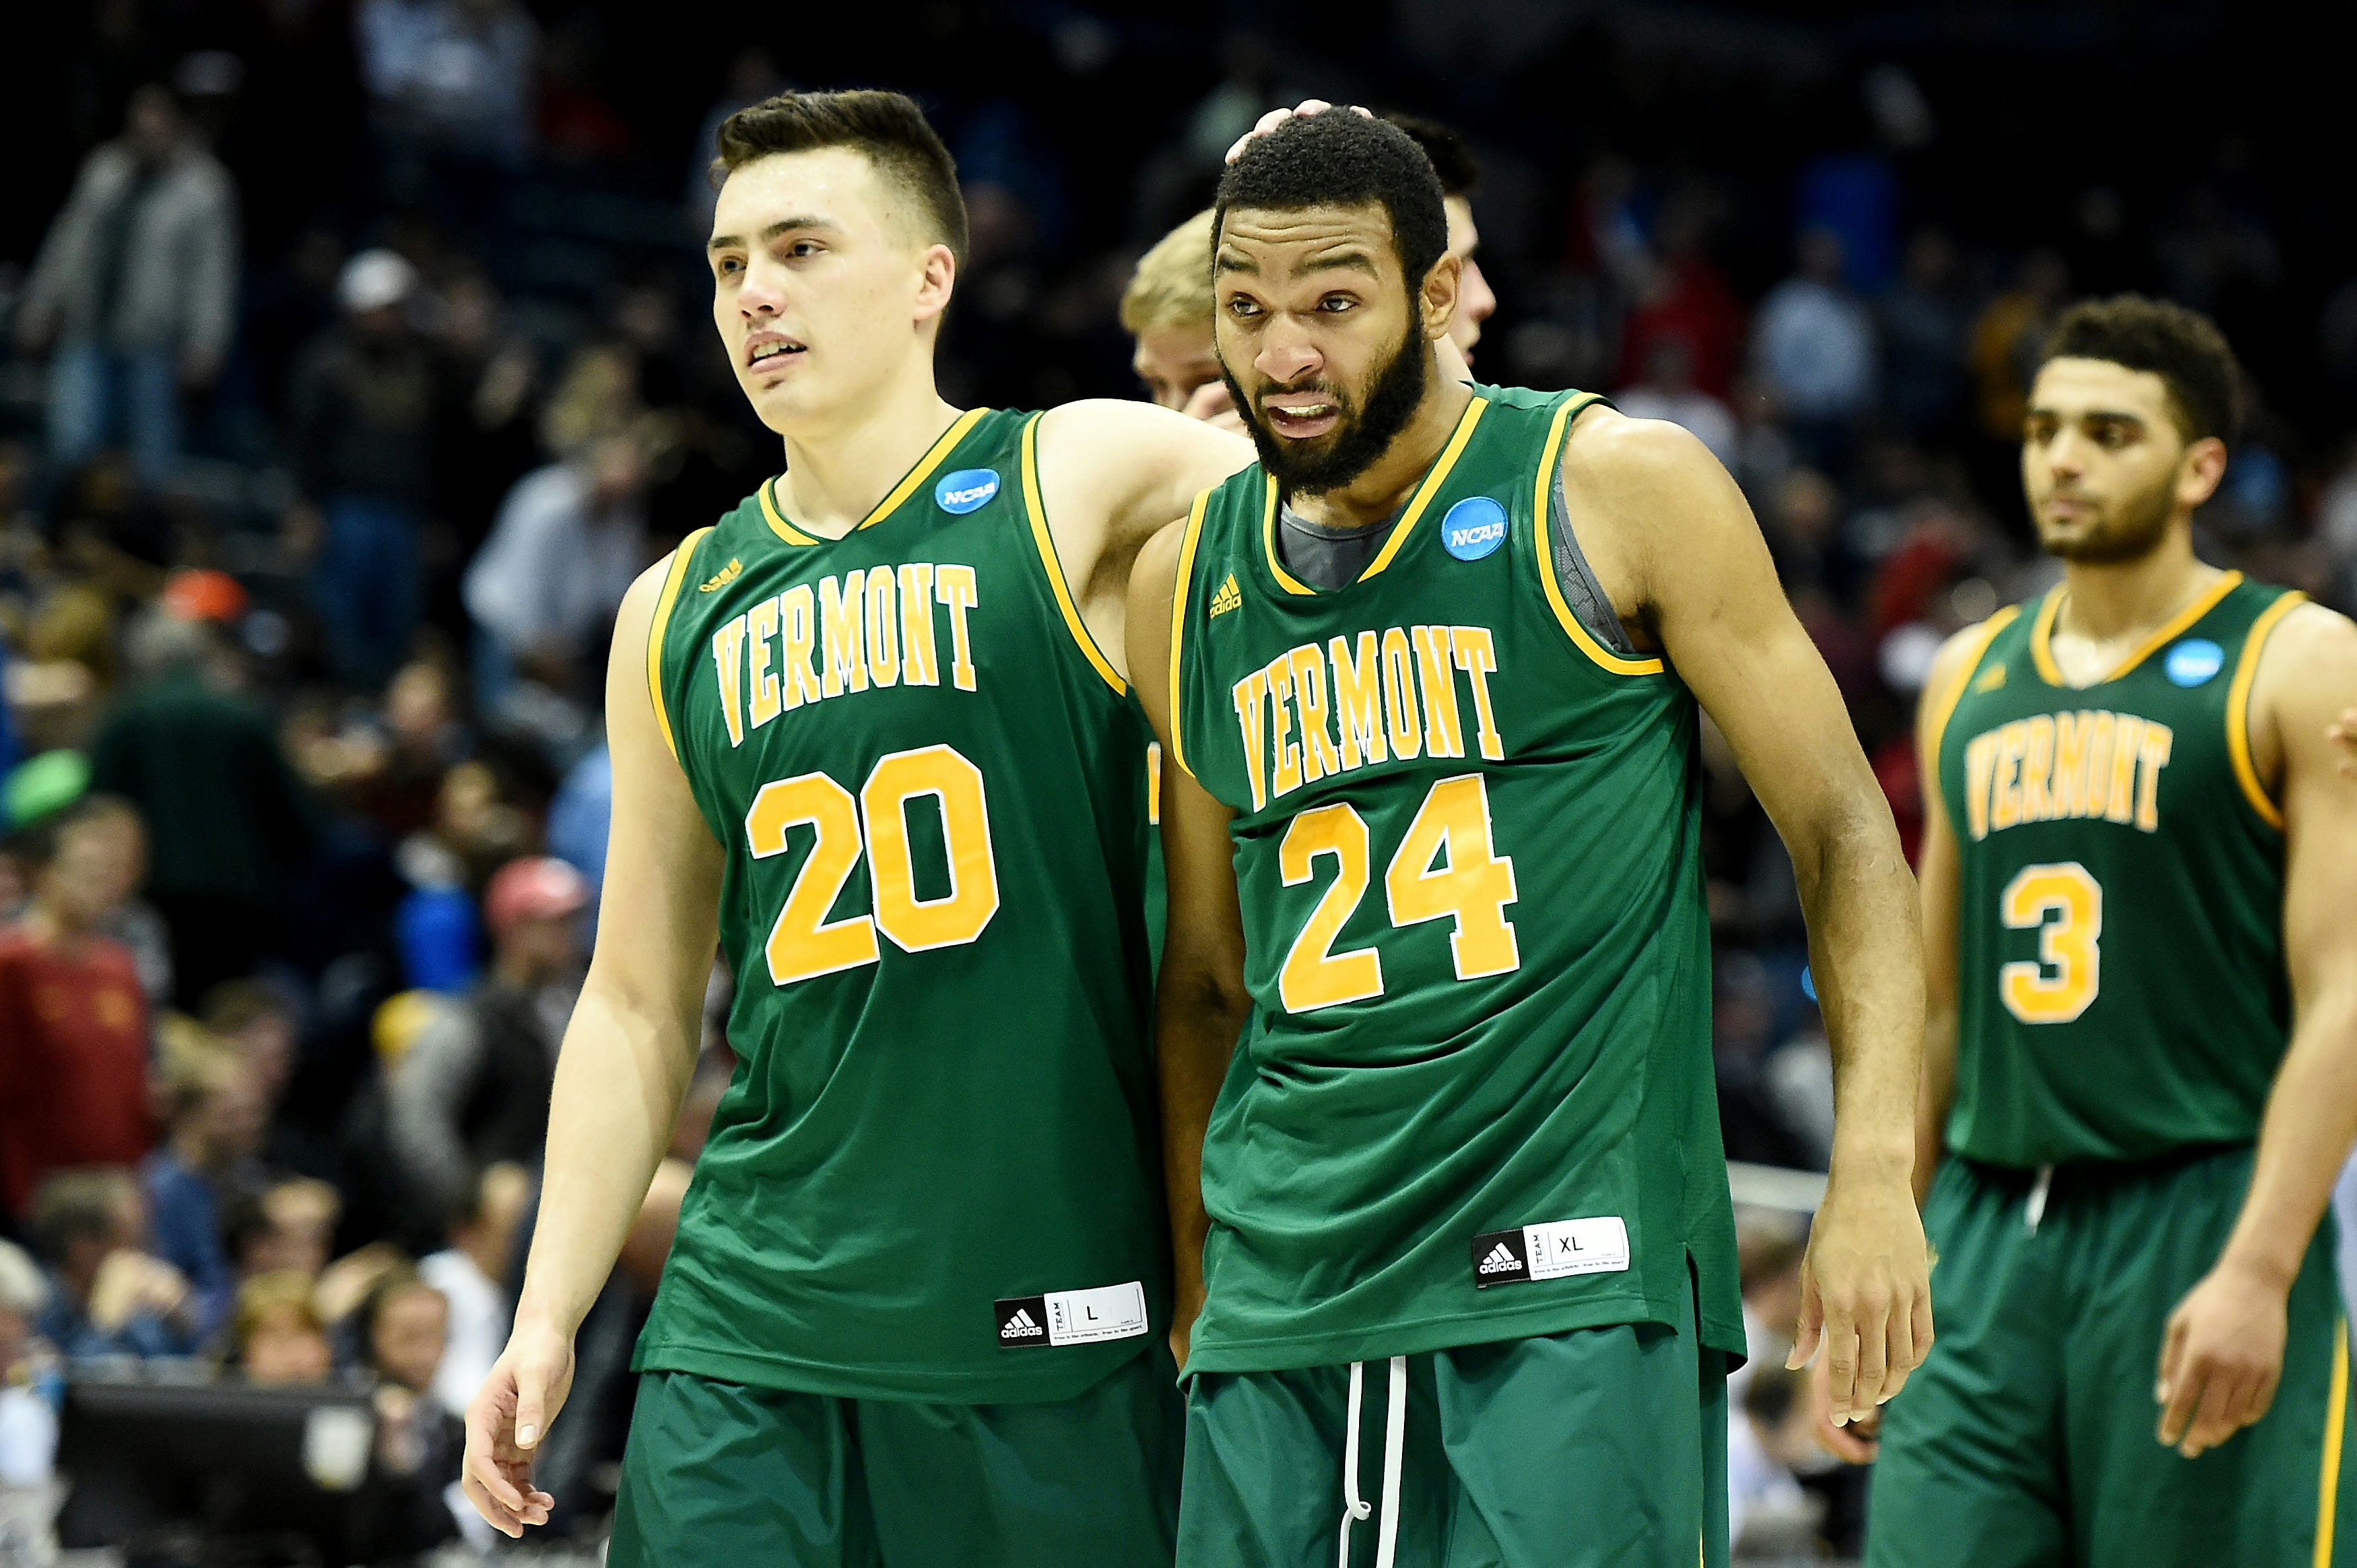 Vermont Basketball: 2018-19 season preview for the Catamounts